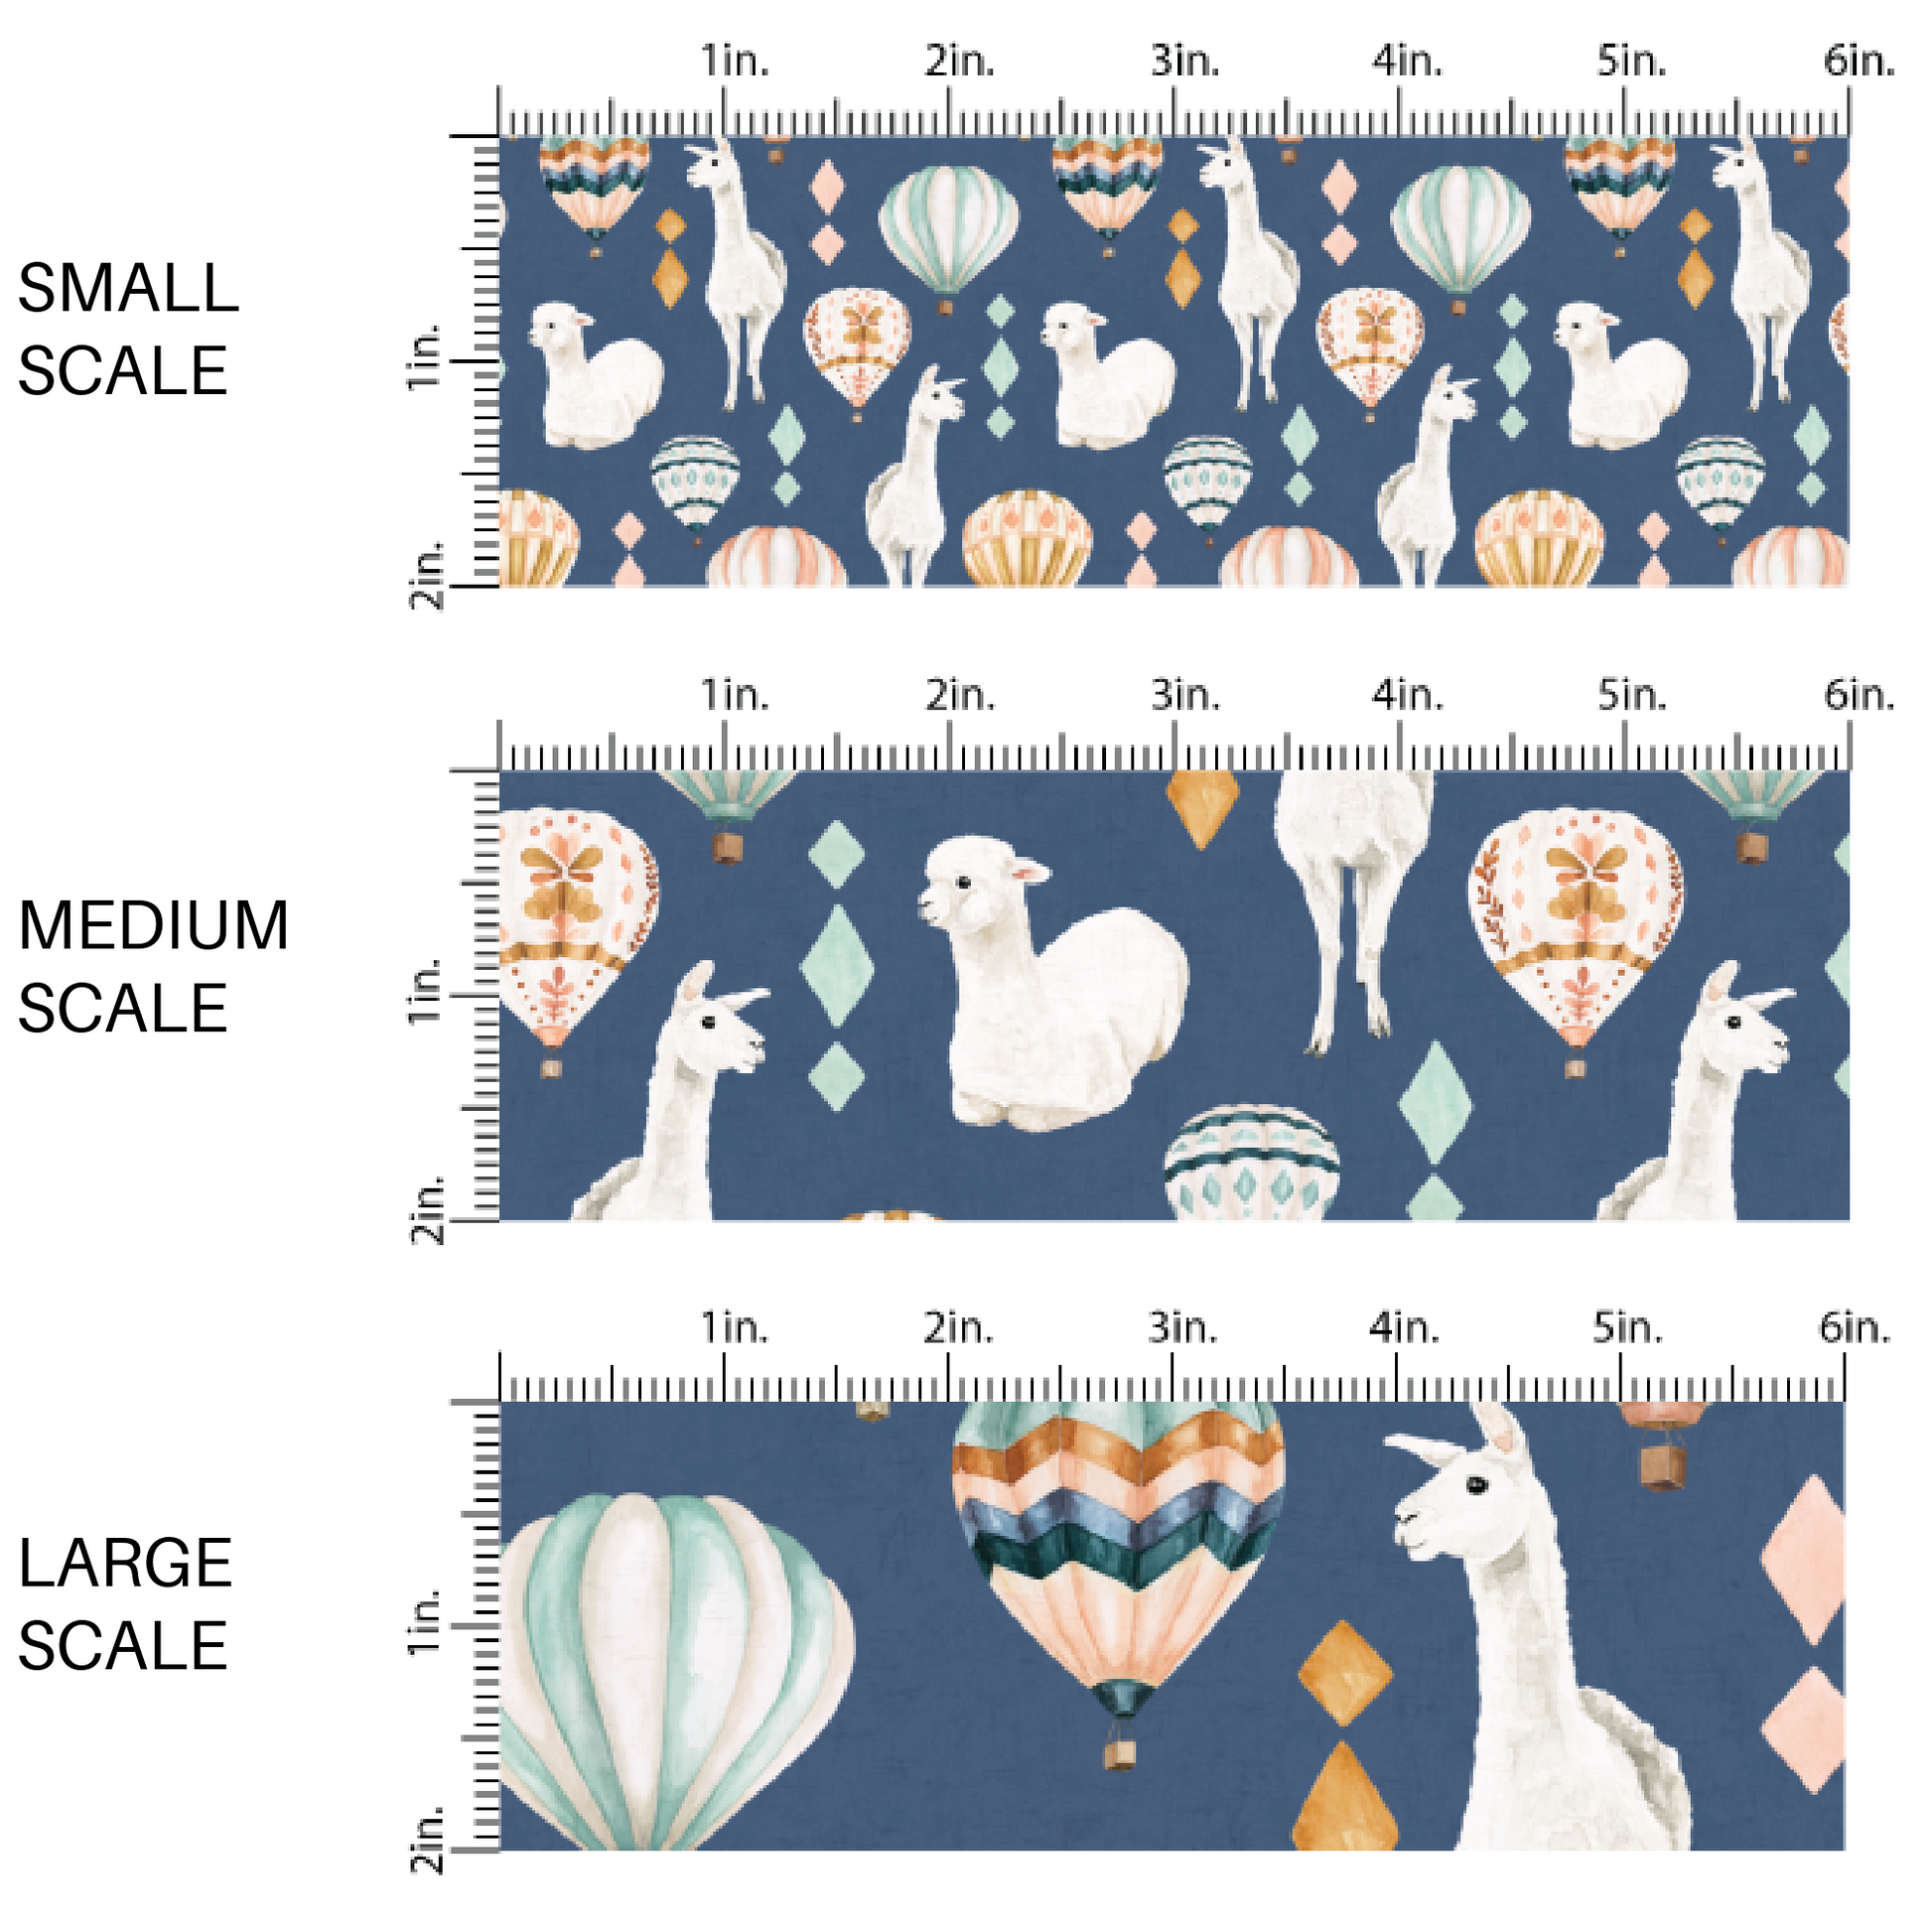 This scale chart of small scale, medium scale, and large scale of these llamas and hot air balloon pattern themed fabric by the yard features llamas surrounded by colorful hot air balloons on dark blue. This fun patterned fabric can be used for all your sewing and crafting needs!